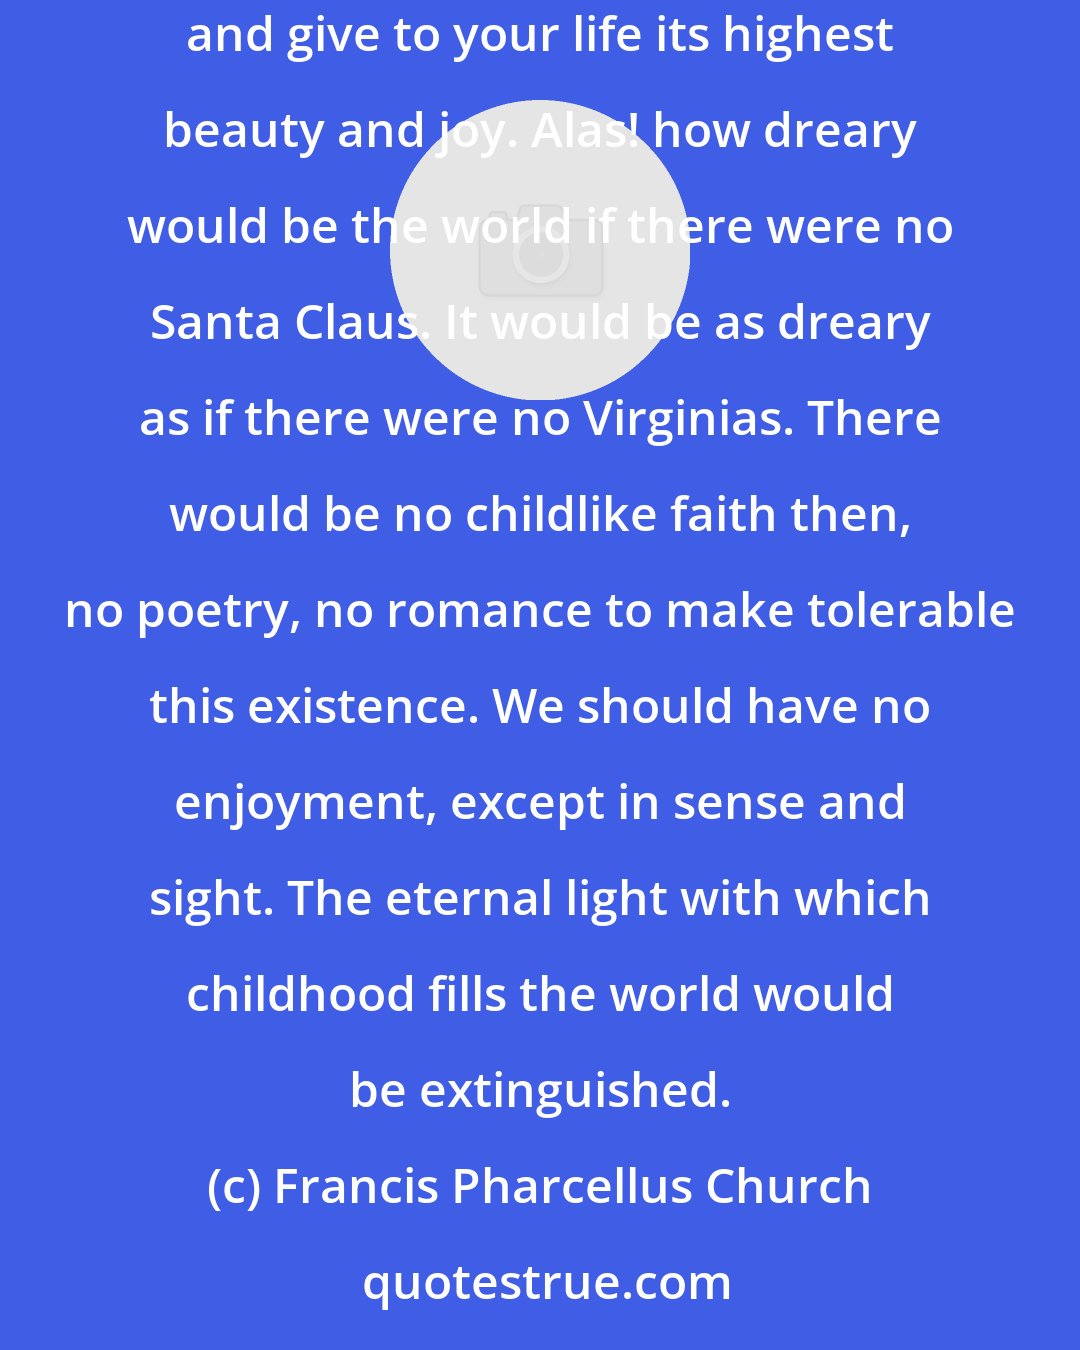 Francis Pharcellus Church: Yes, Virginia, there is a Santa Claus. He exists as certainly as love and generosity and devotion exist, and you know that they abound and give to your life its highest beauty and joy. Alas! how dreary would be the world if there were no Santa Claus. It would be as dreary as if there were no Virginias. There would be no childlike faith then, no poetry, no romance to make tolerable this existence. We should have no enjoyment, except in sense and sight. The eternal light with which childhood fills the world would be extinguished.